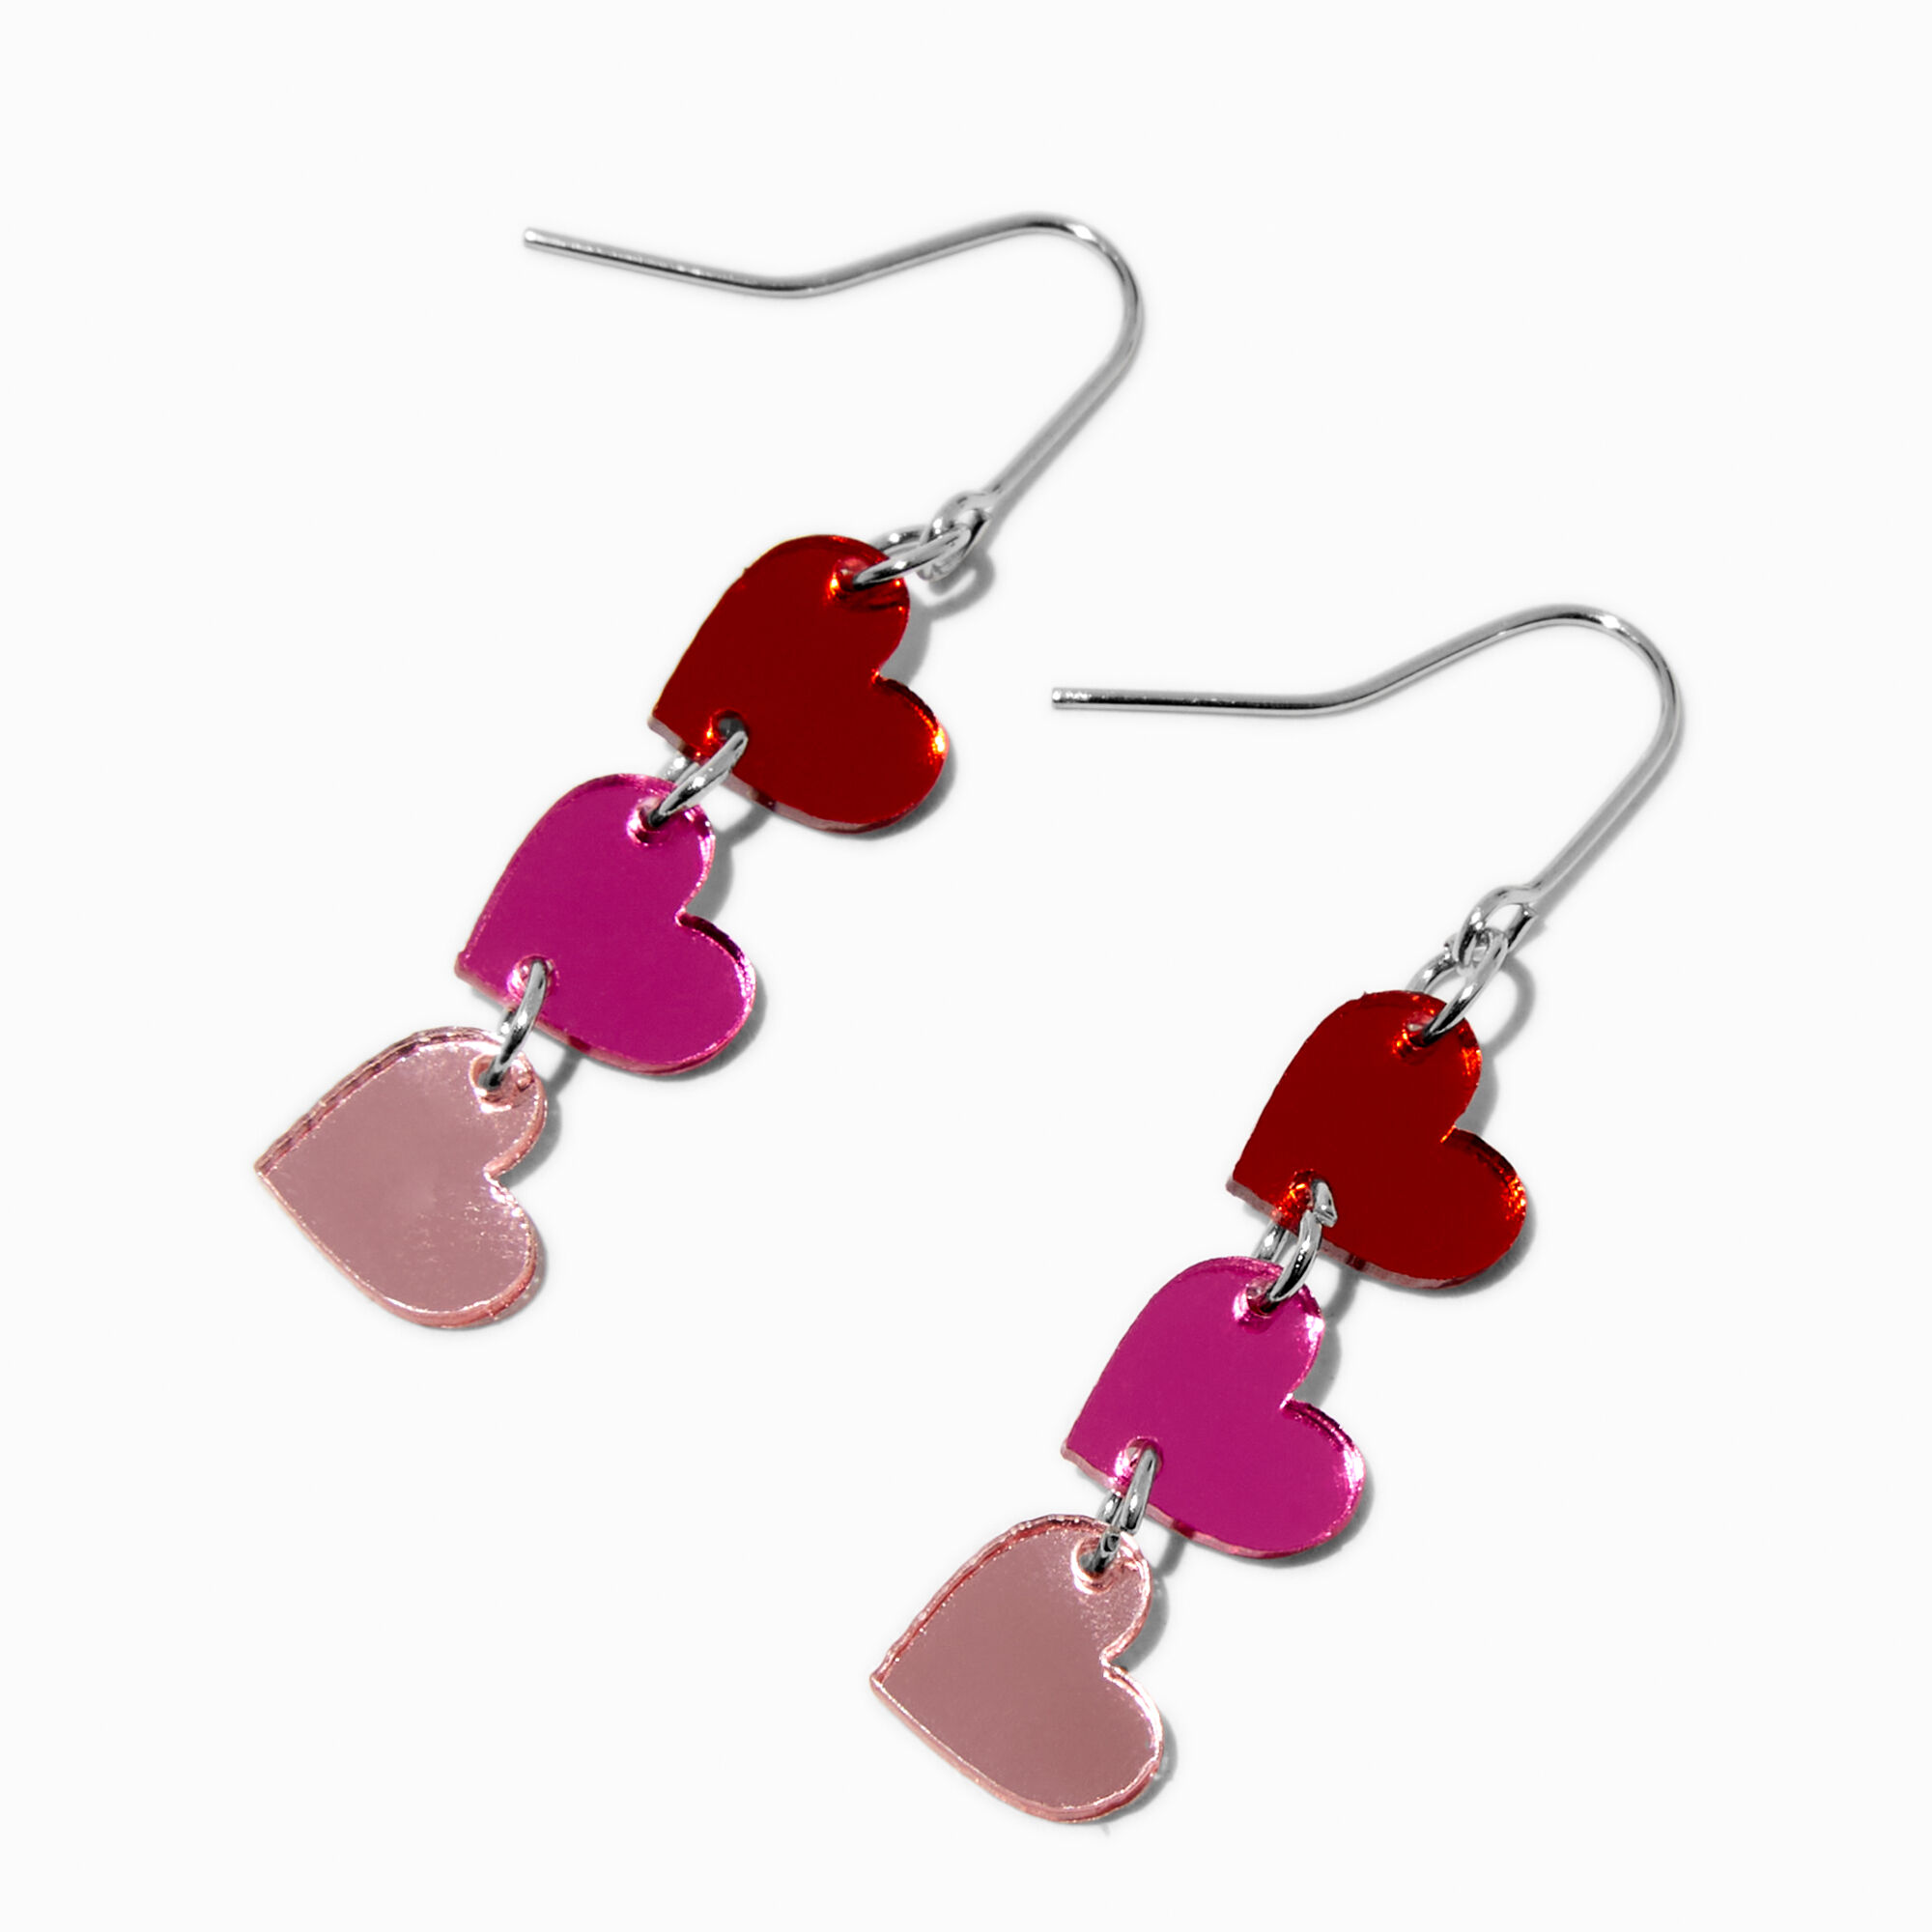 View Claires SilverTone Linear Heart 15 Drop Earrings Pink information